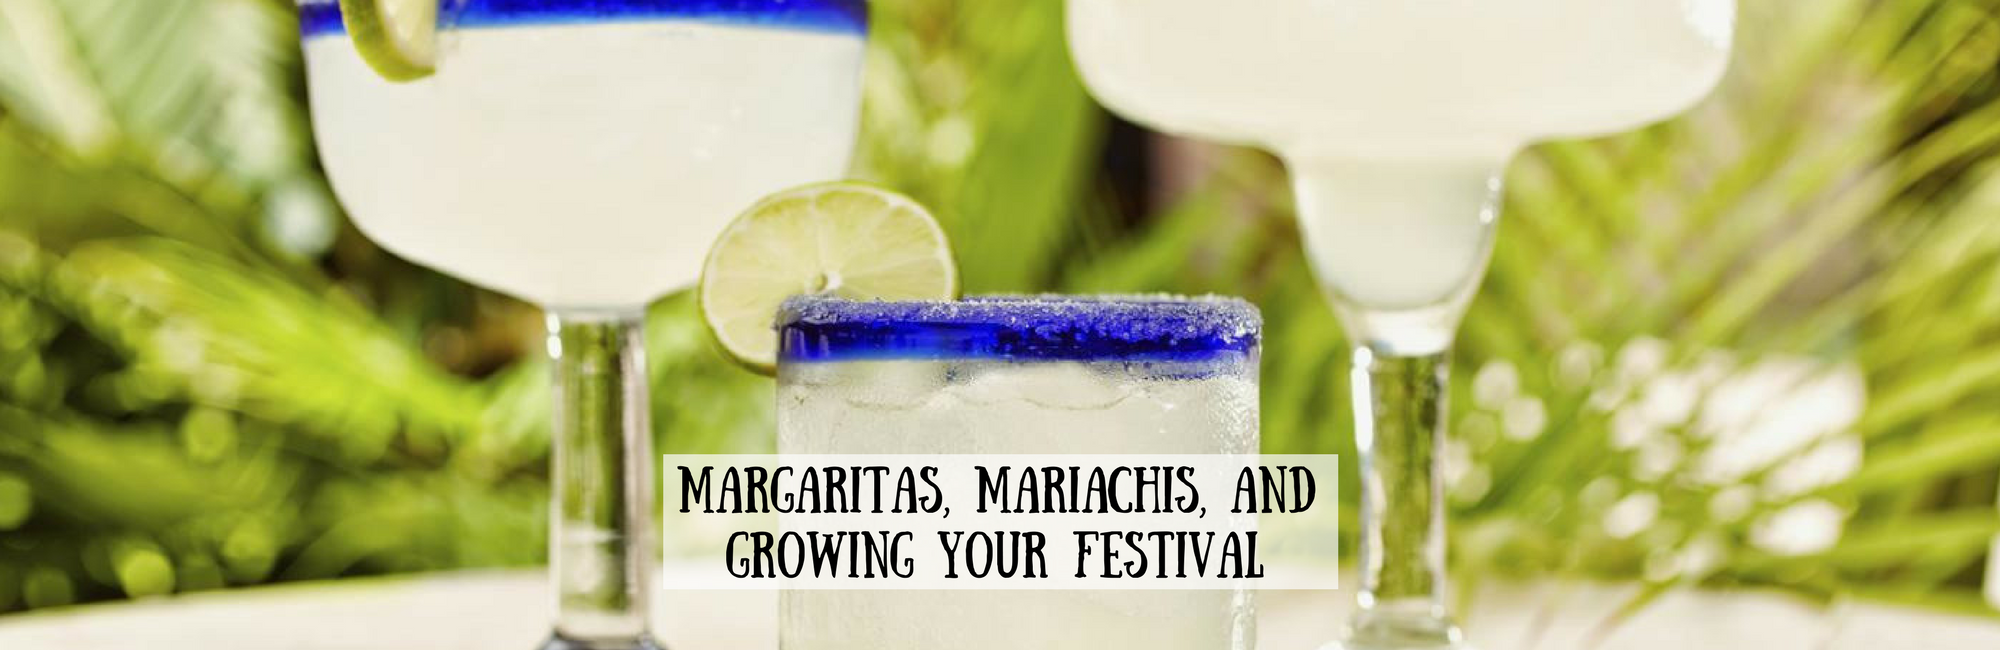 Margaritas, Mariachis, and Growing Your Festival with image of 3 margaritas